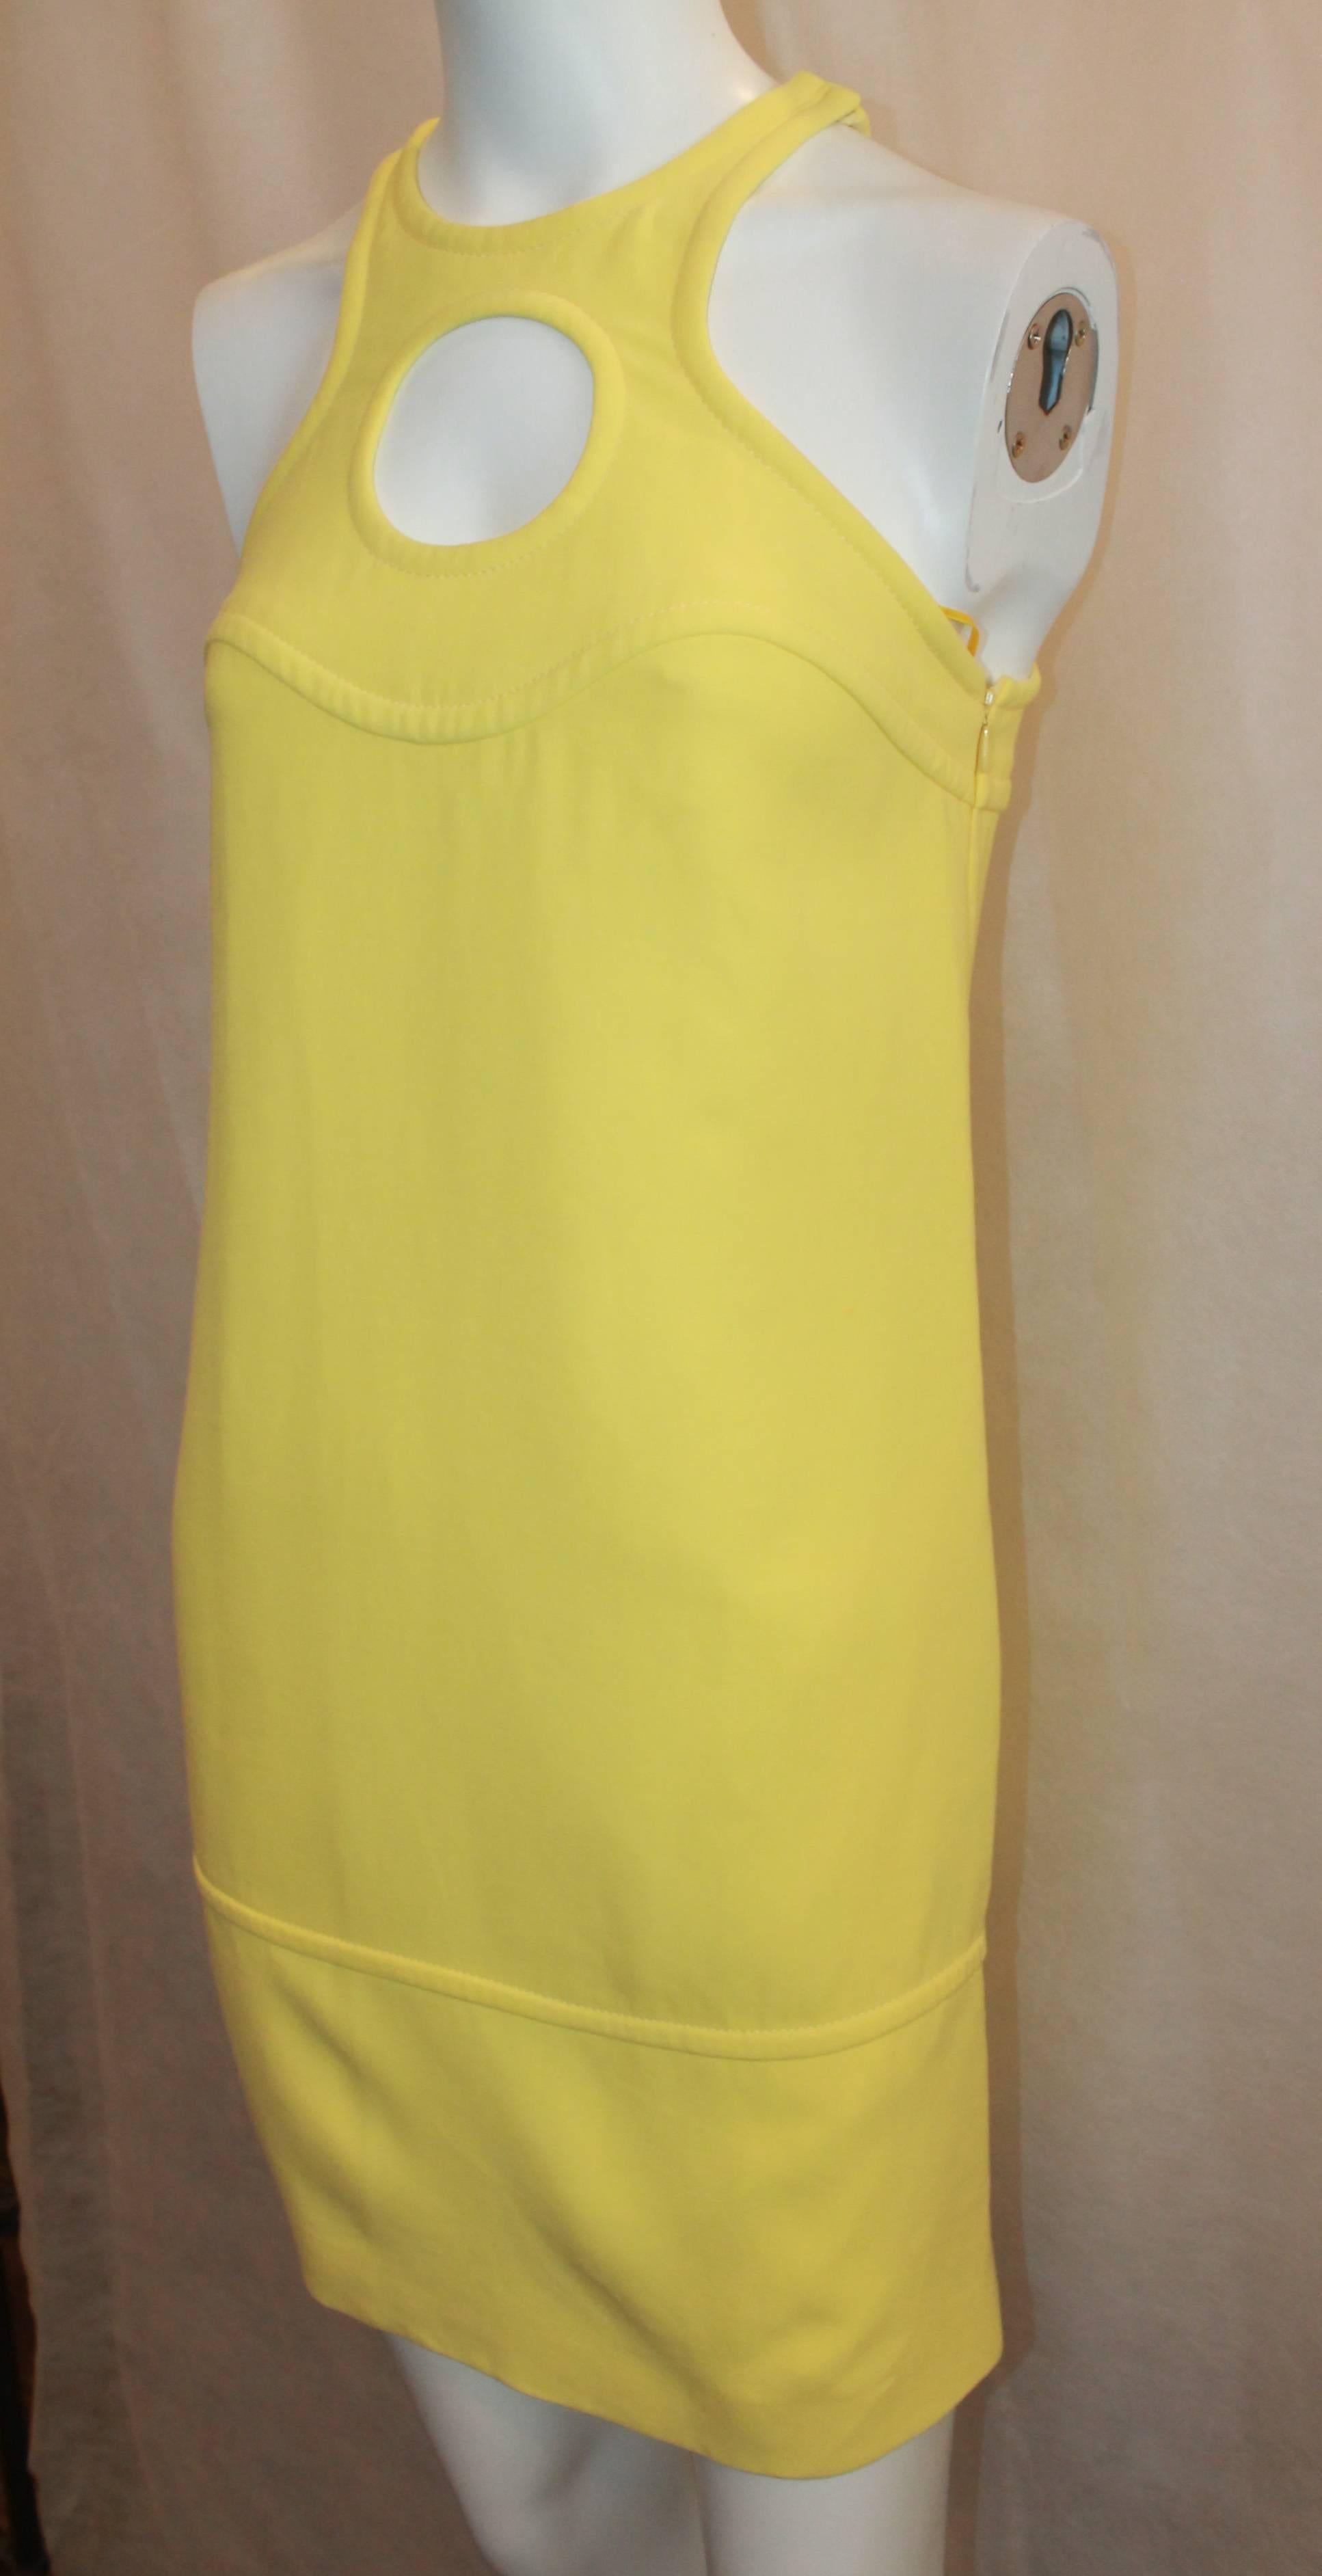 Emilio Pucci New Yellow Halter Dress with Keyhole - 38. This dress is in excellent condition and is perfect for spring and summer. This dress has a thick cotton fabric with 2 side pockets. It has one speck in the front which cannot be seen unless